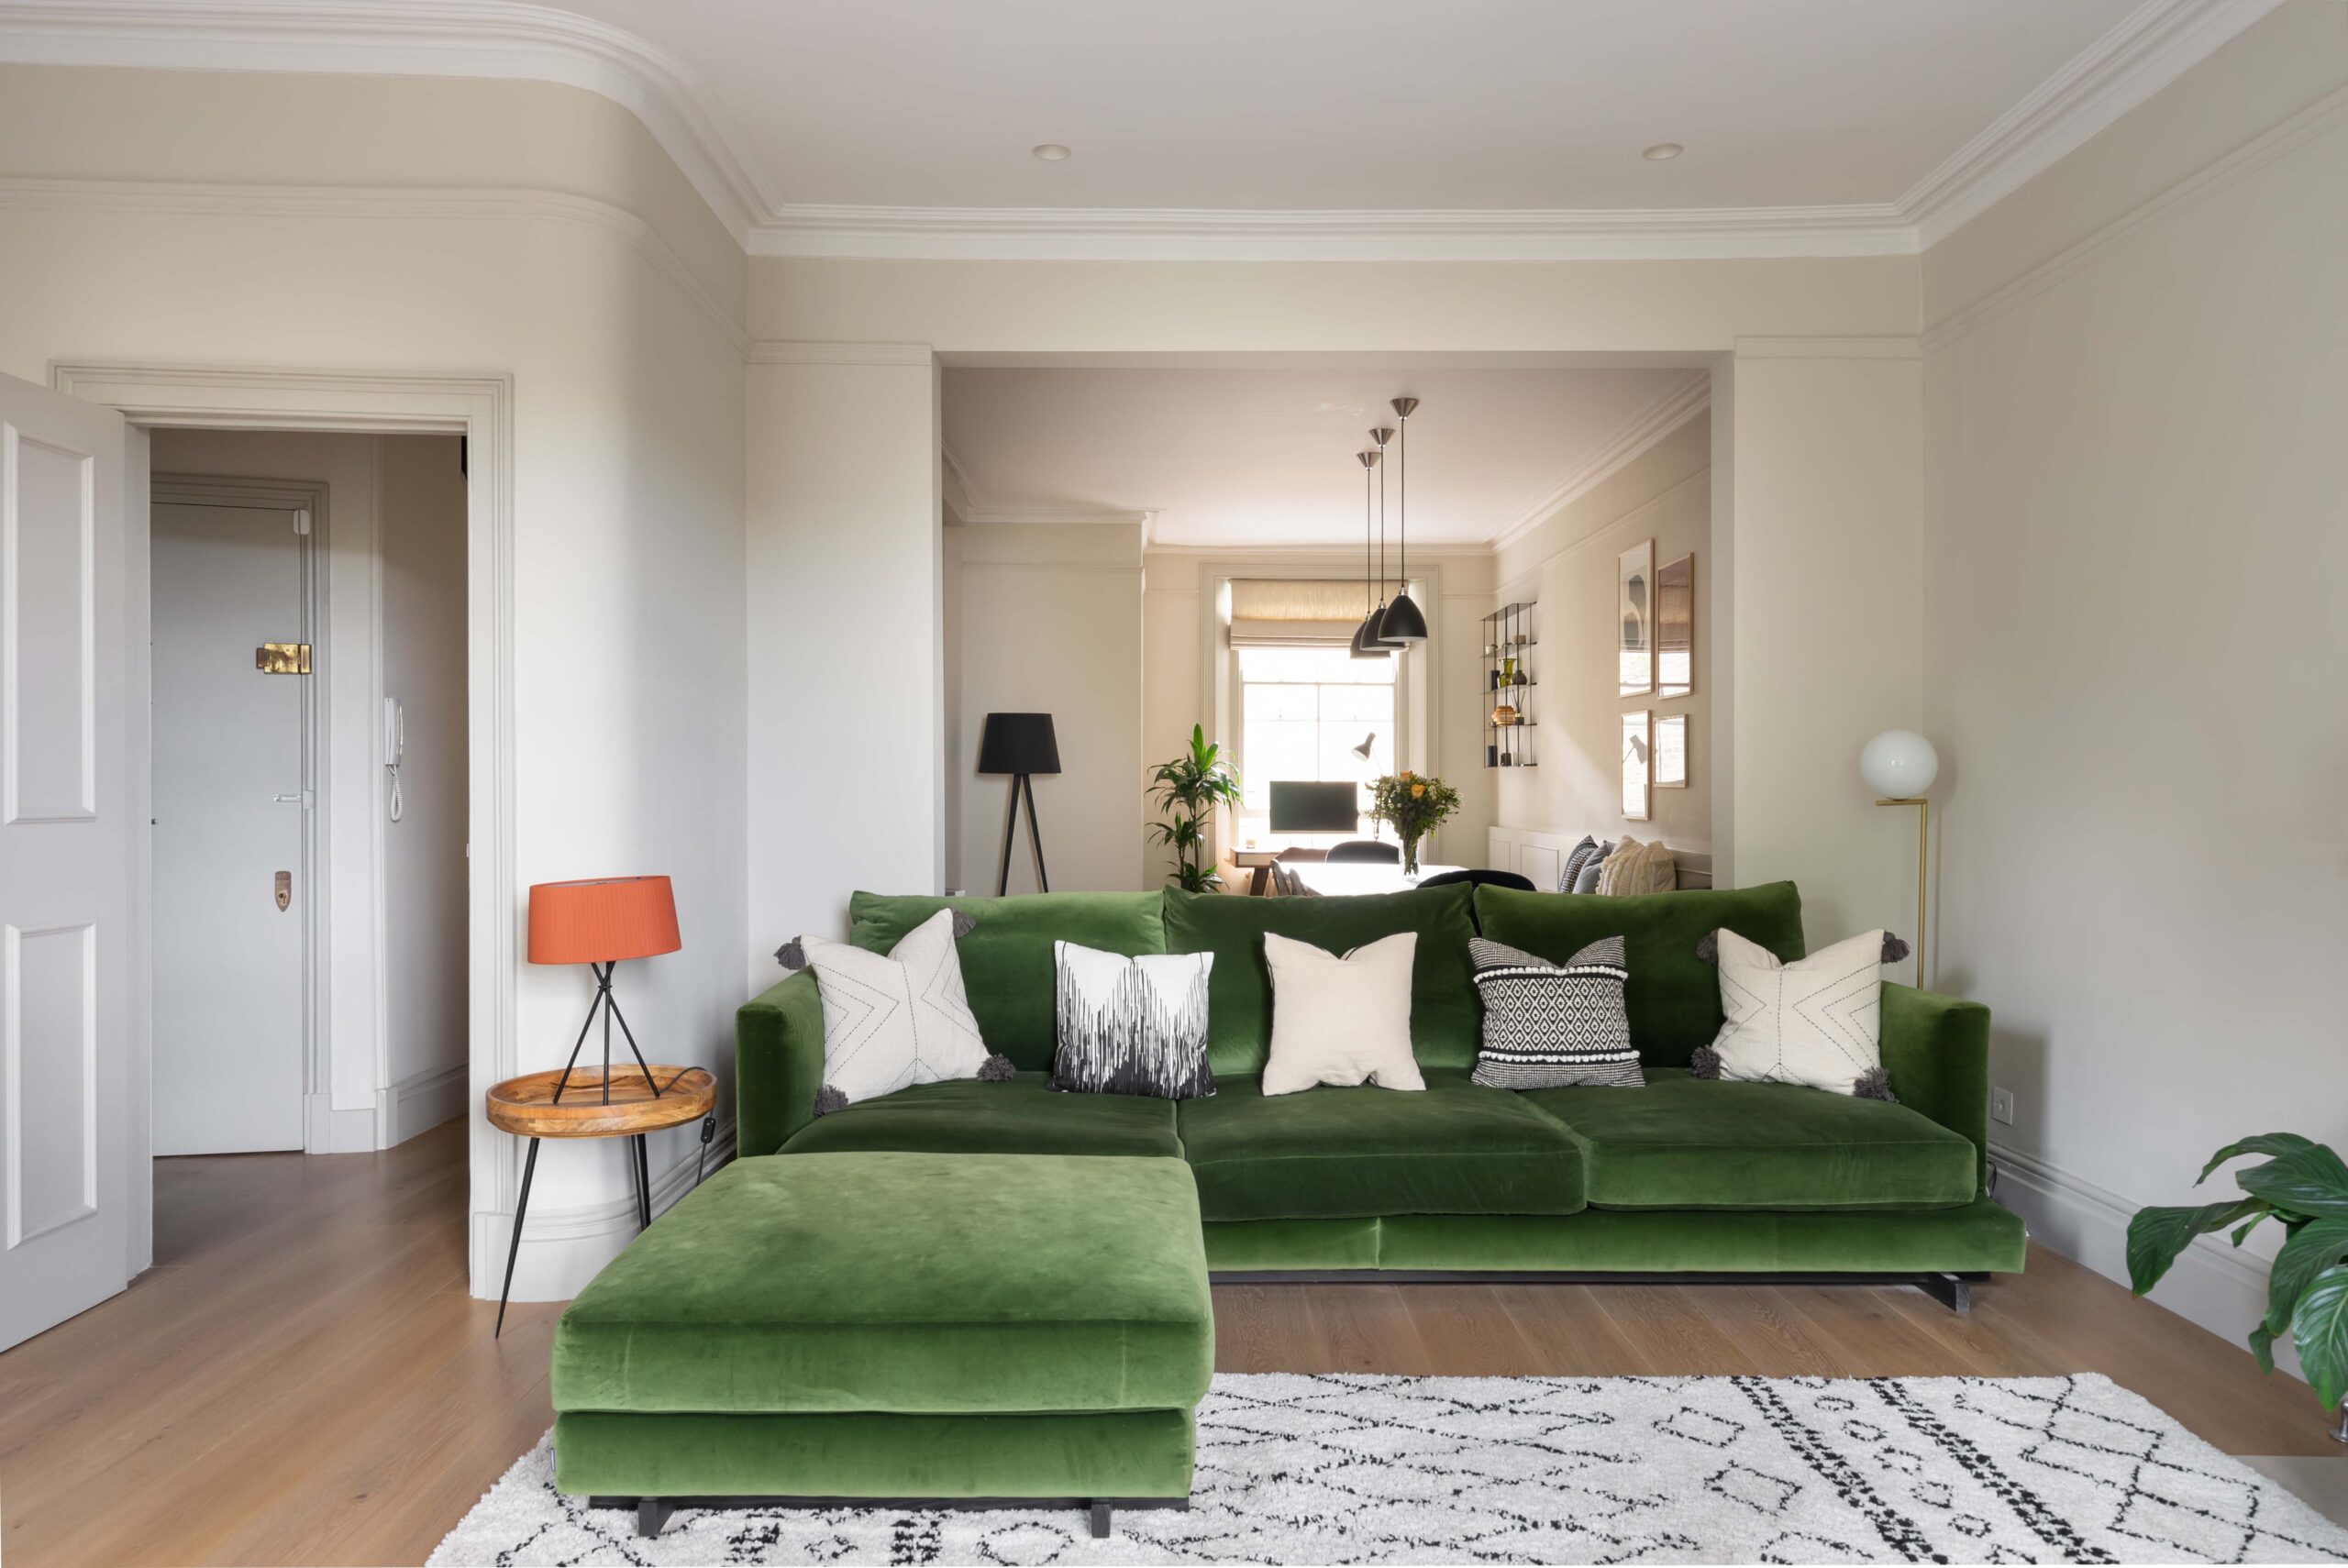 Linden Gardens Living Room and Green Sofa